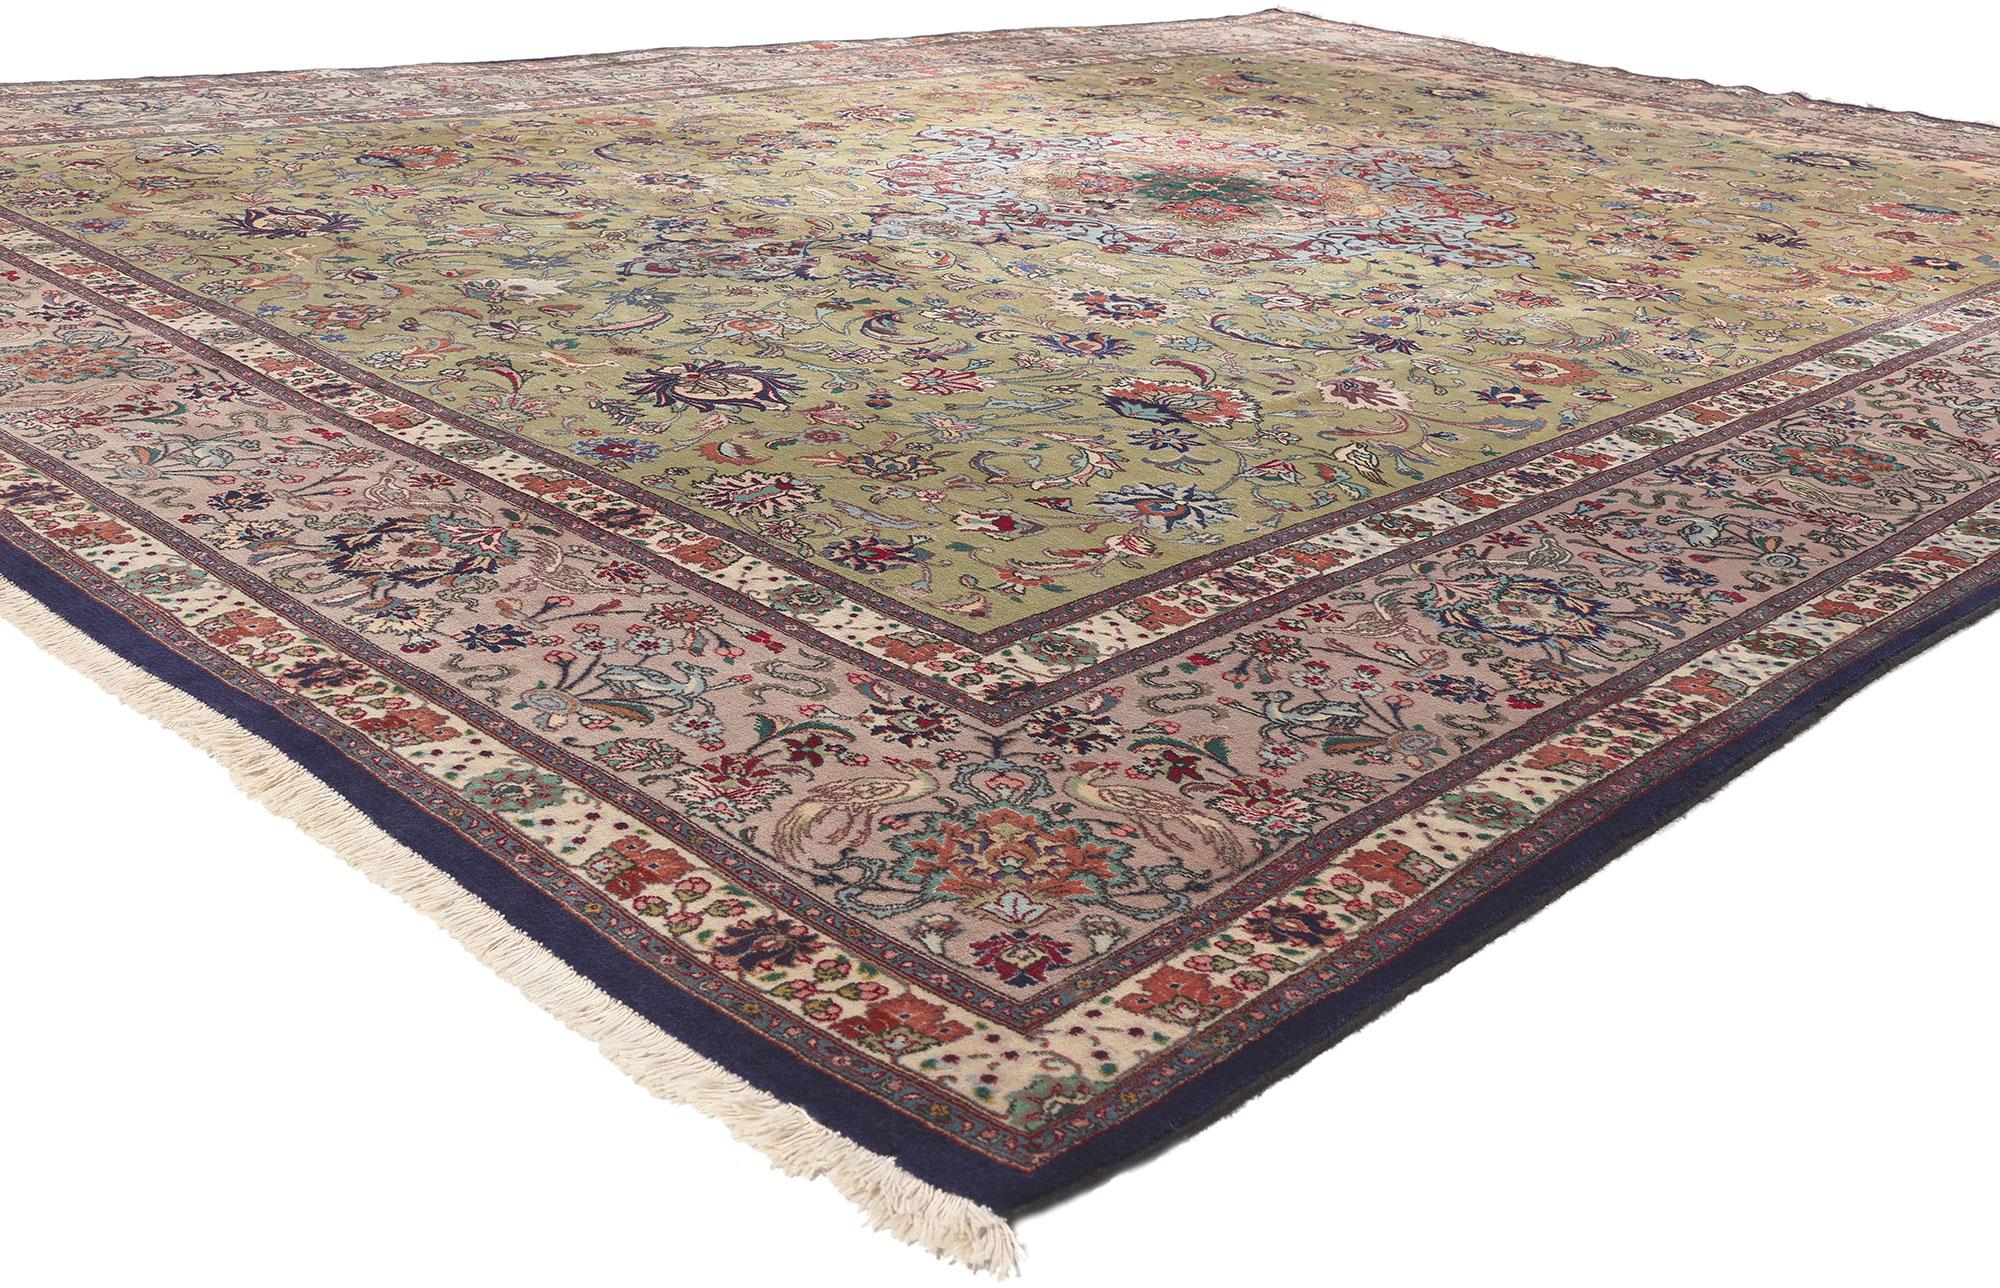 53864 Vintage Persian Tabriz Rug, 09'07 x 13'01.
Emanating traditional style with incredible detail and texture, this hand knotted wool vintage Persian Tabriz rug is a captivating vision of woven beauty. The timeless floral pattern and soft